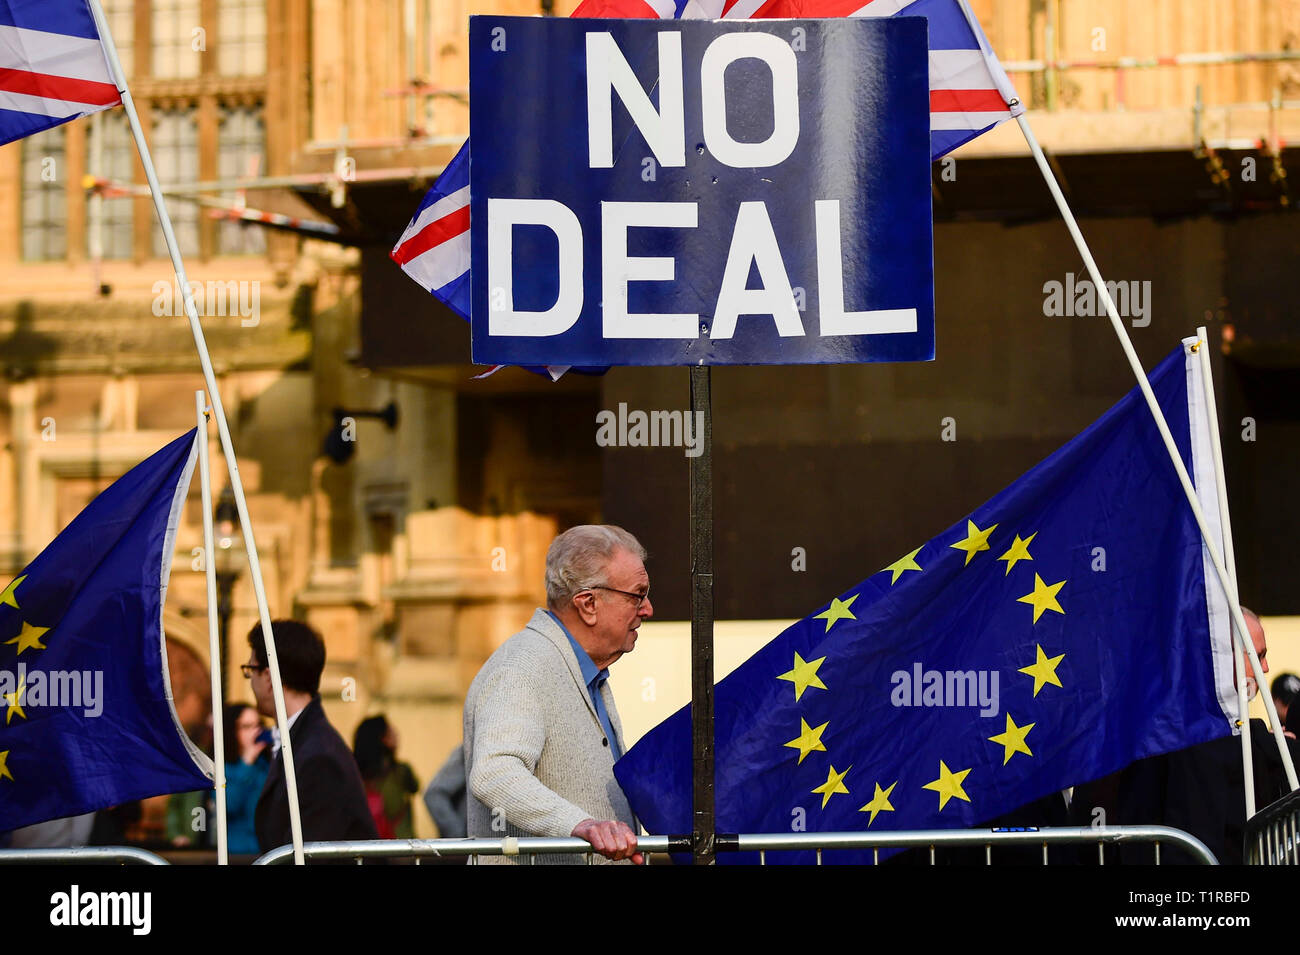 London, UK.  28 March 2019.  Pro-Remain and Pro-Leave protesters outside the Houses of Parliament in Westminster.  MPs are to vote on Theresa May's EU withdrawal agreement for a third time tomorrow, on what would have been the original date the UK would have left the European Union.   Credit: Stephen Chung / Alamy Live News Stock Photo